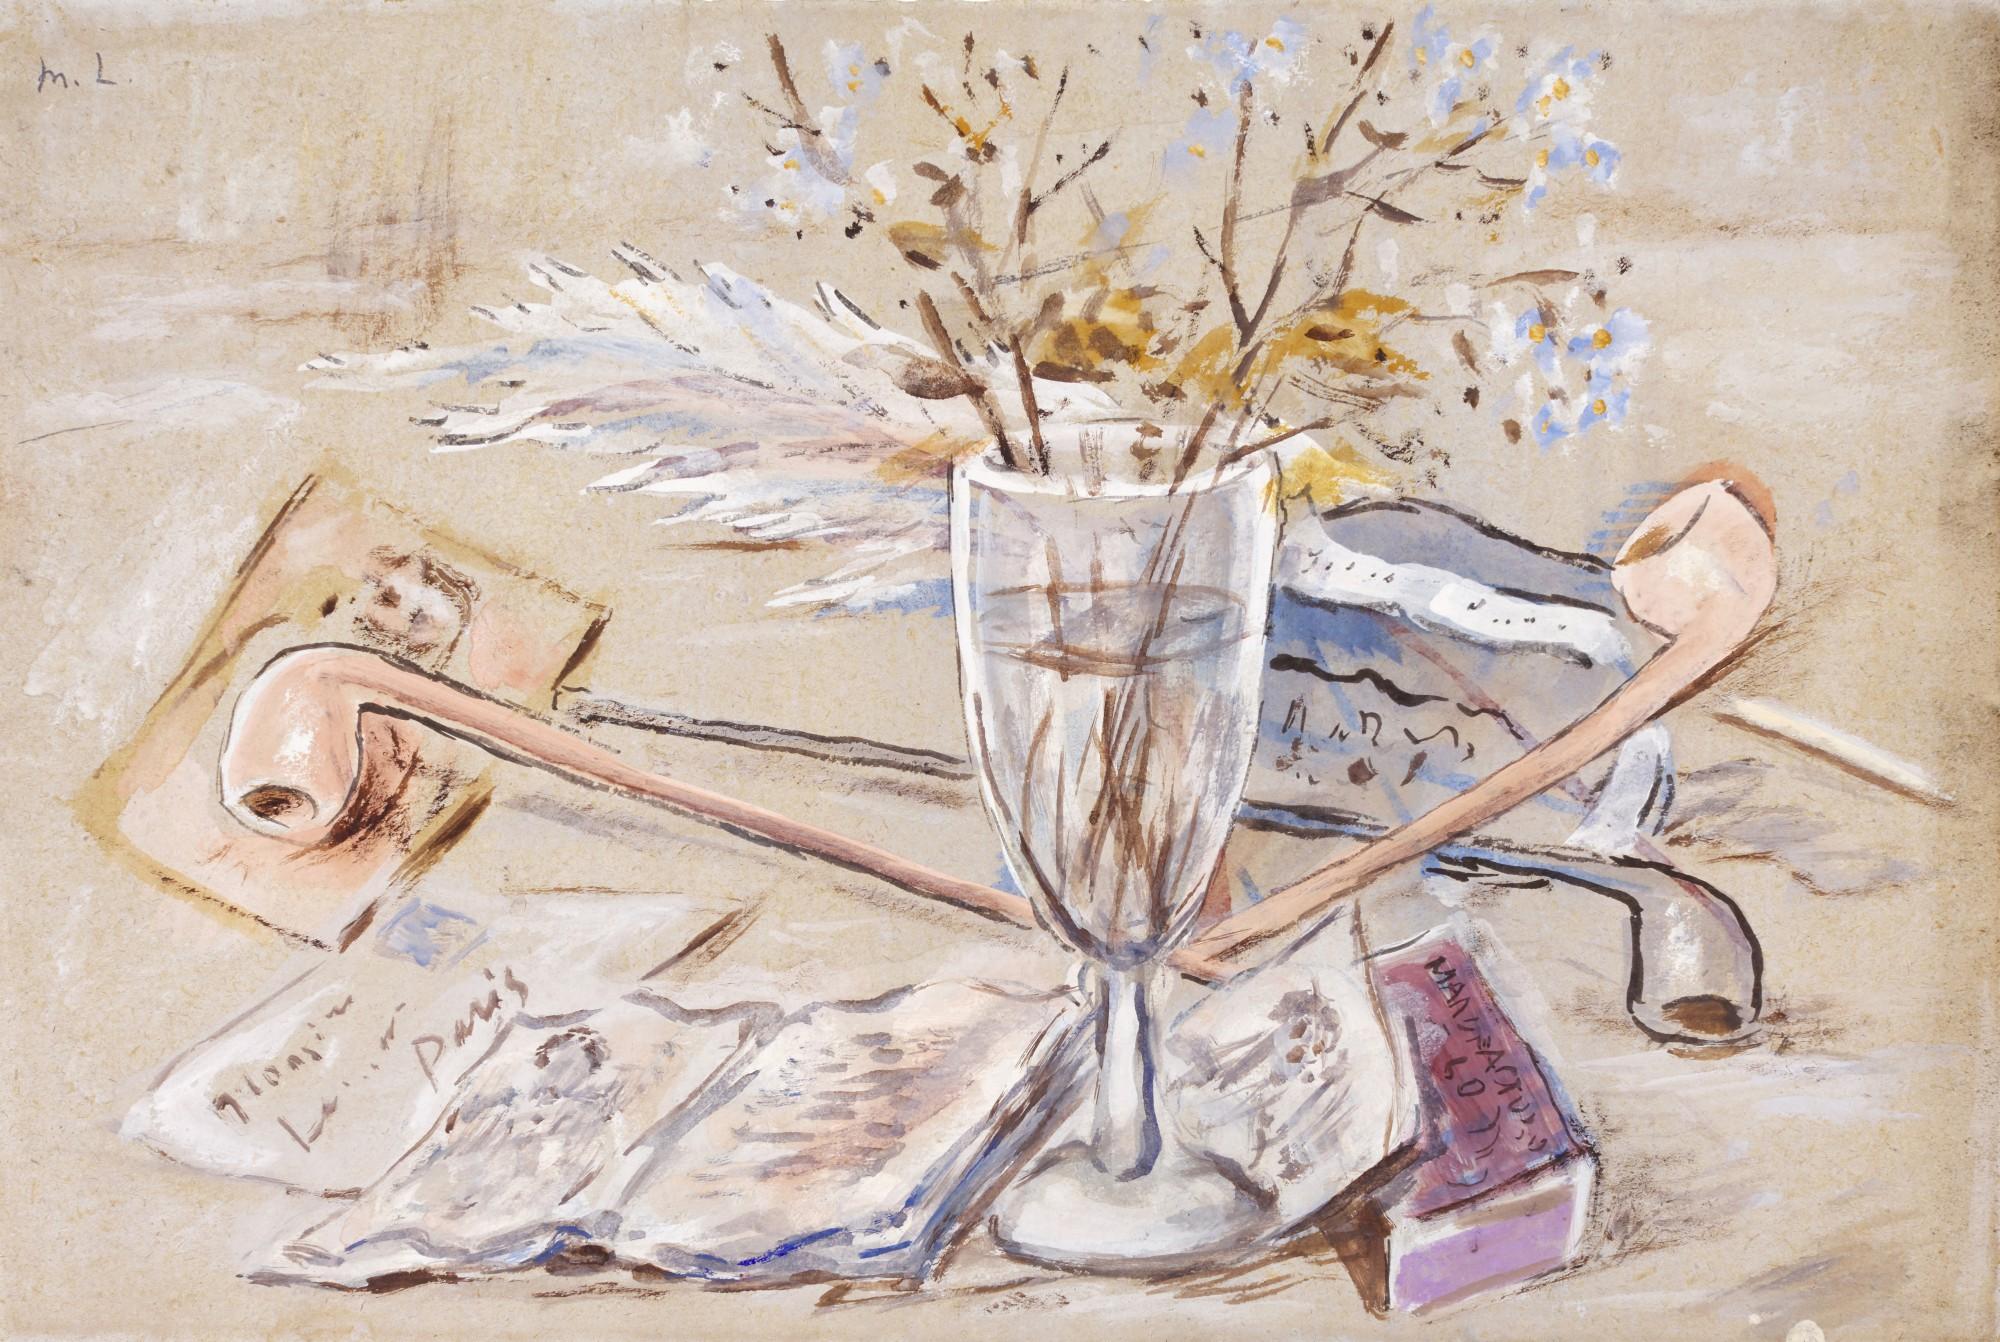 https://www.art.salon/images/mikhail-fedorovich-larionov_still-life-with-glass-pipes-and-letters_AID516677.jpg?f=grey